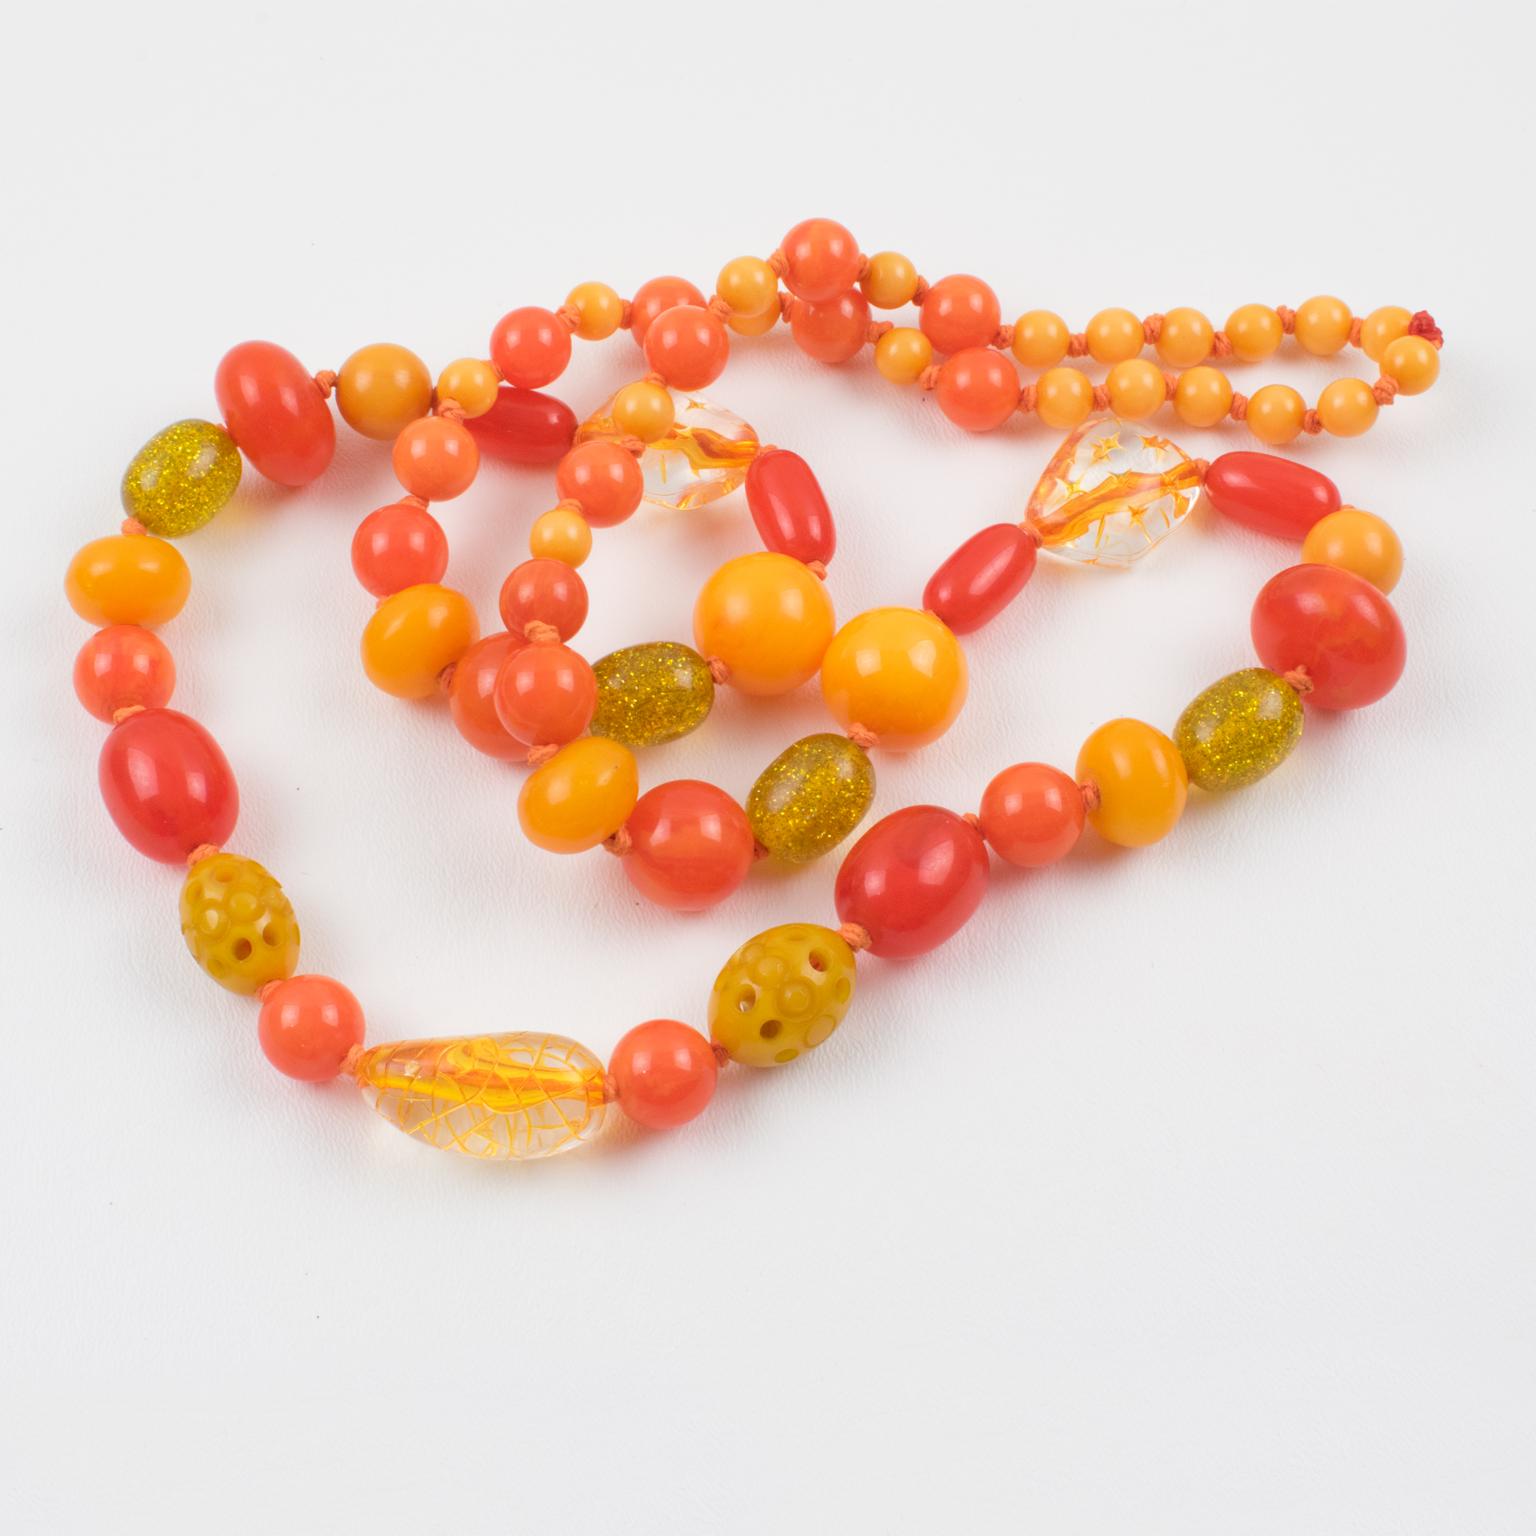 Bakelite and Lucite Long Necklace Sunny Yellow and Orange Colors In Excellent Condition For Sale In Atlanta, GA